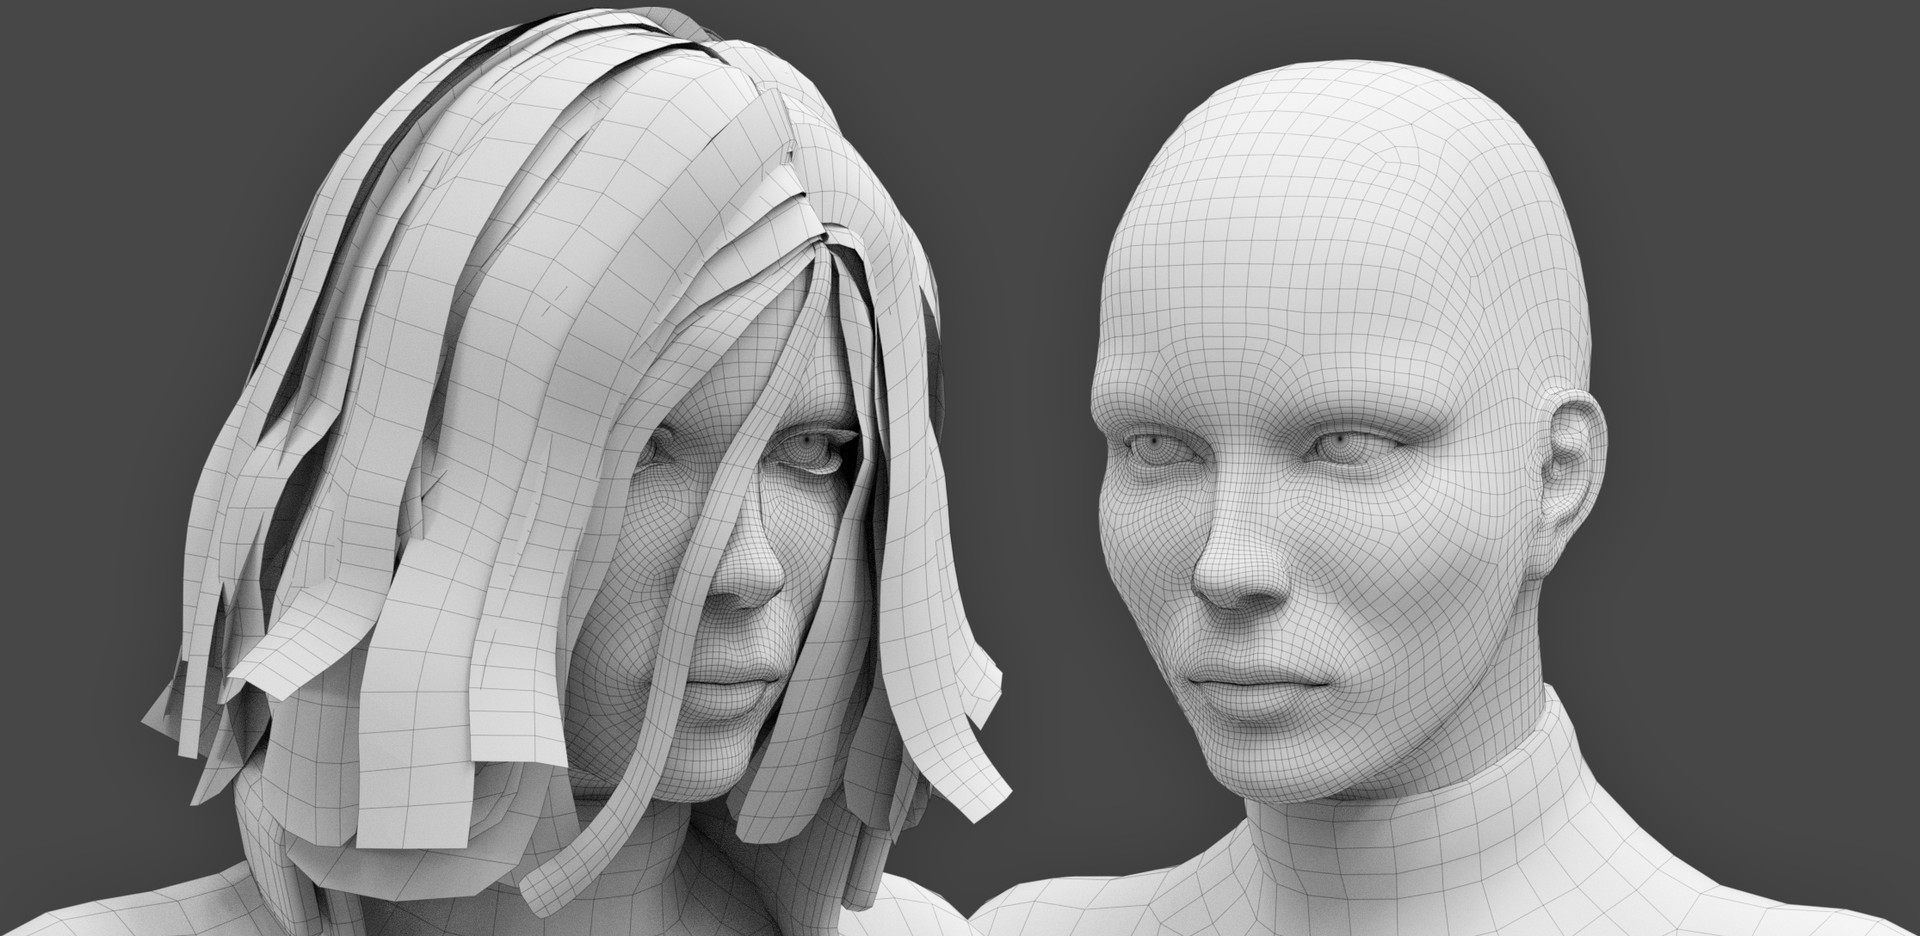 High poly vs low poly comparison. low poly has normal, ao, and alhpa